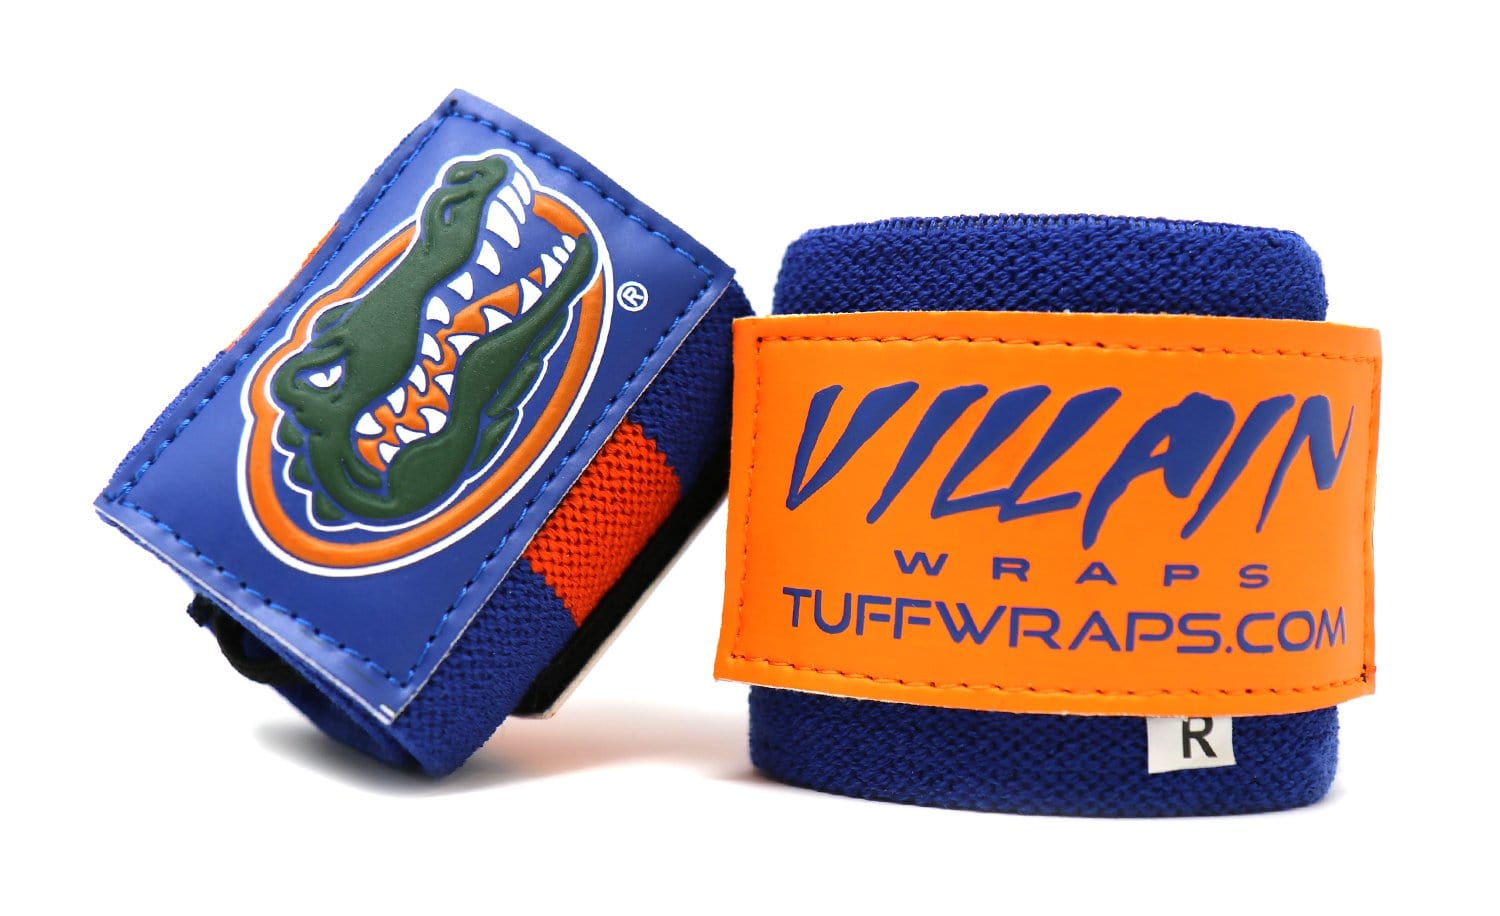 It's Official, first in the industry with NCAA Licensed Wrist Wraps!